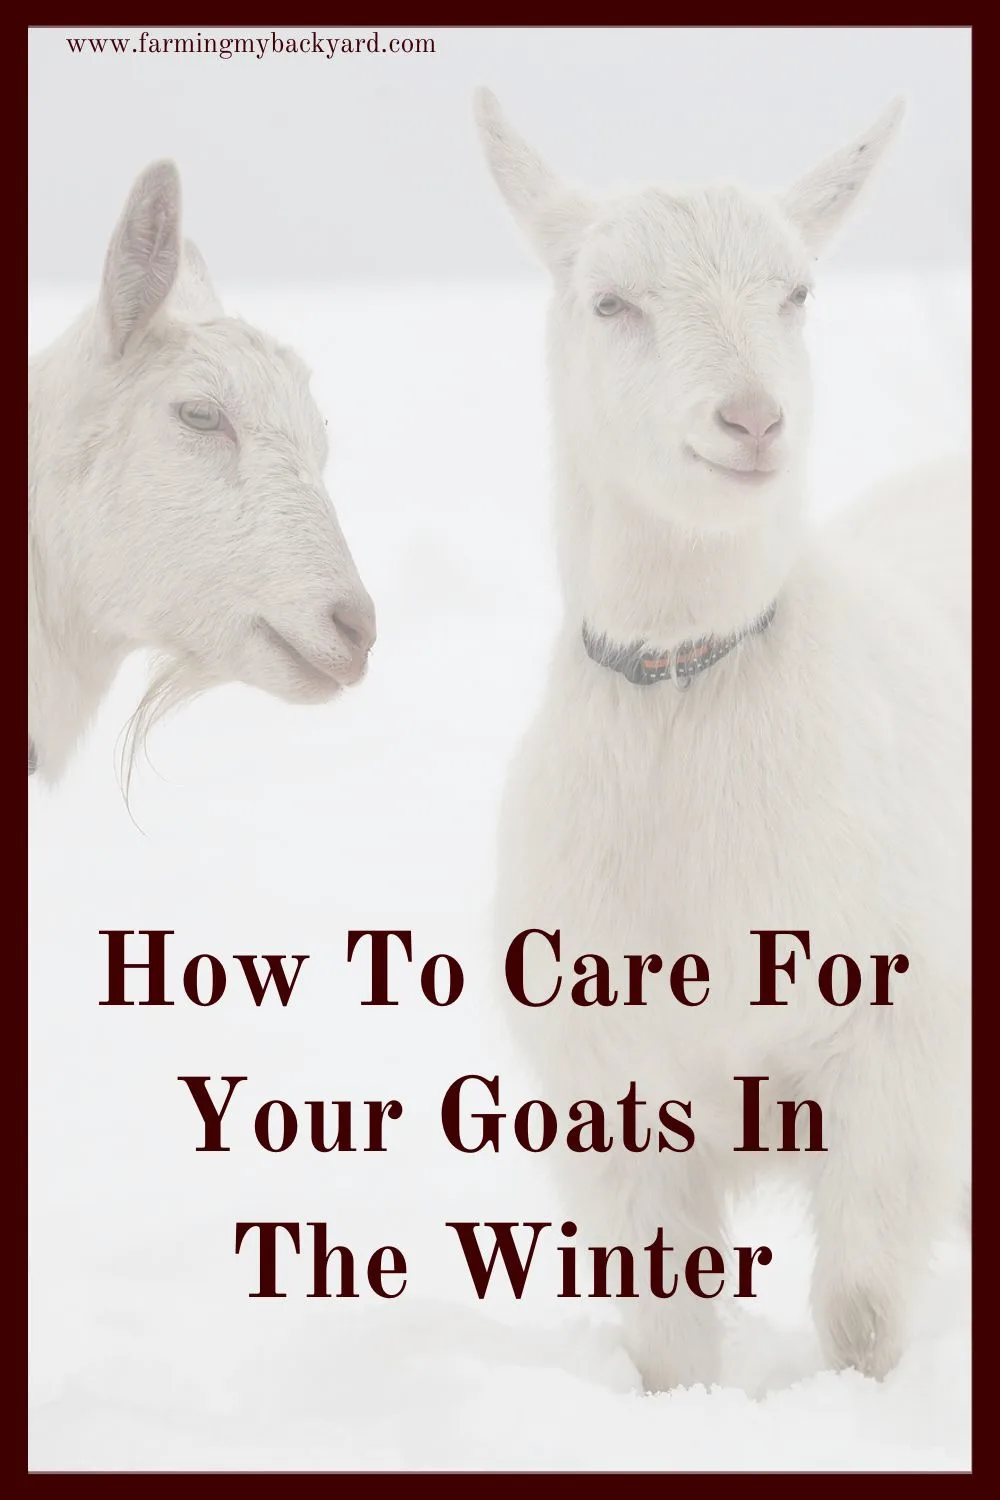 Goats are cold hardy, but need a little extra attention in extreme weather. Here are tips on winter goat care!